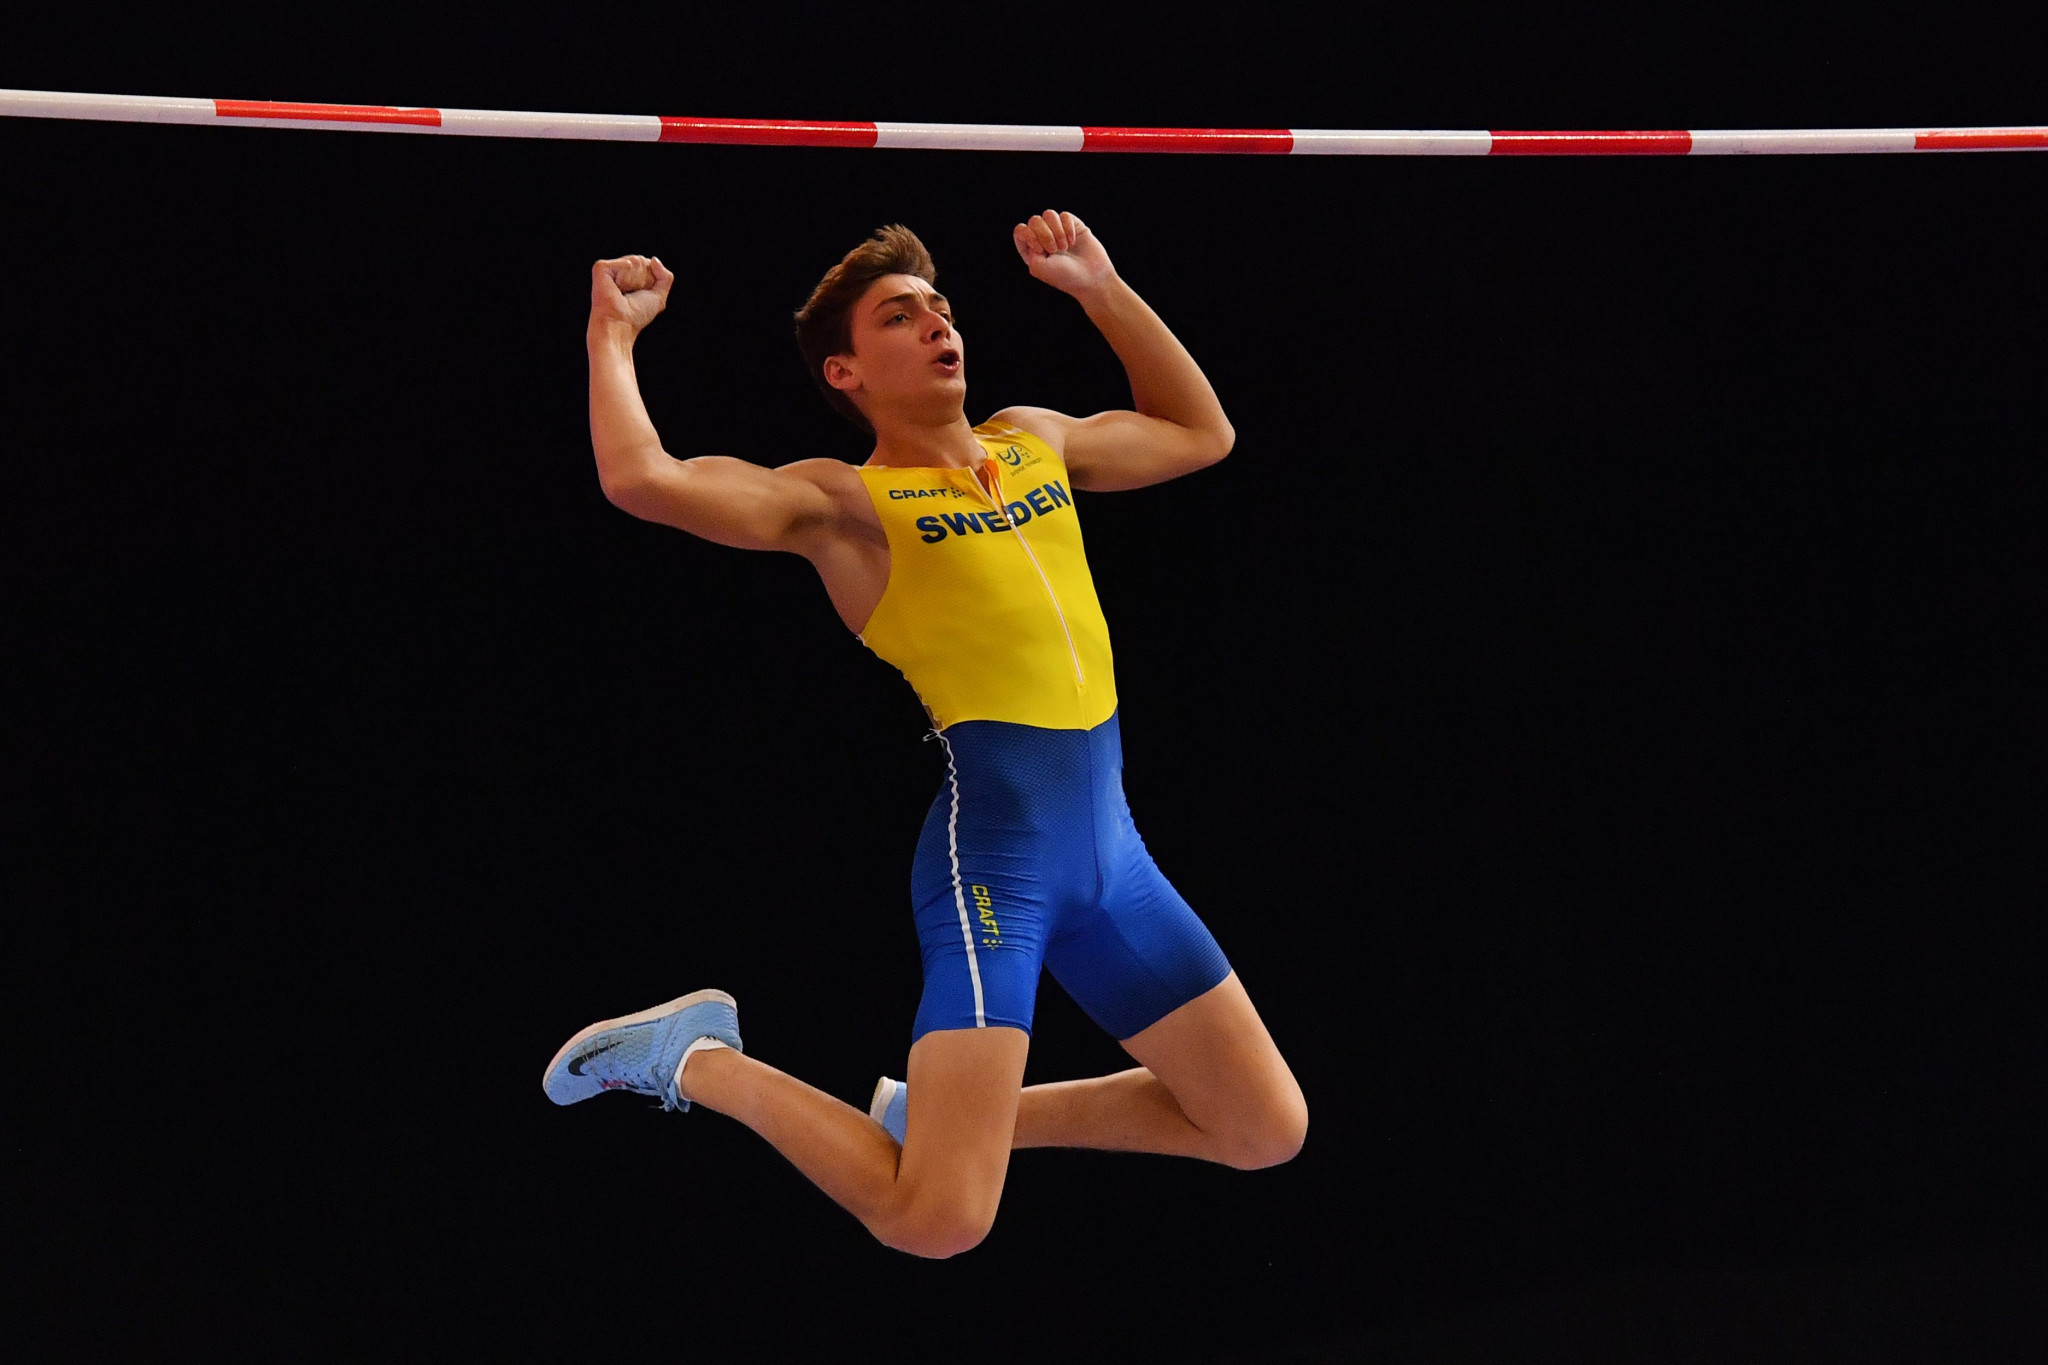  Swedish teenager up for ruling the world at home IAAF Diamond League meeting in Stockholm